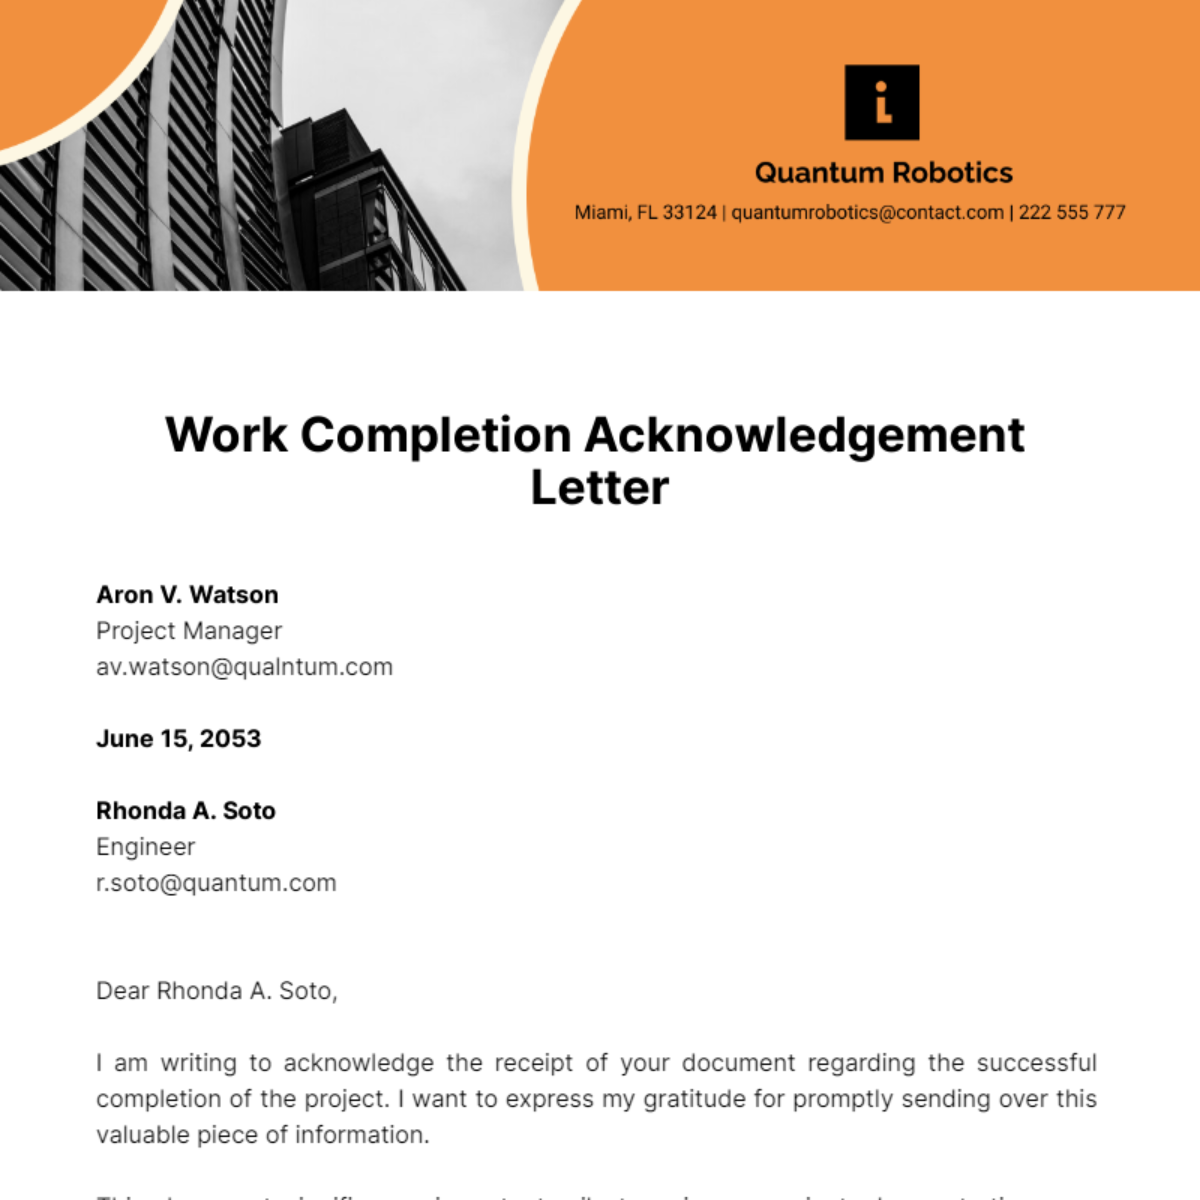 Work Completion Acknowledgement Letter Template